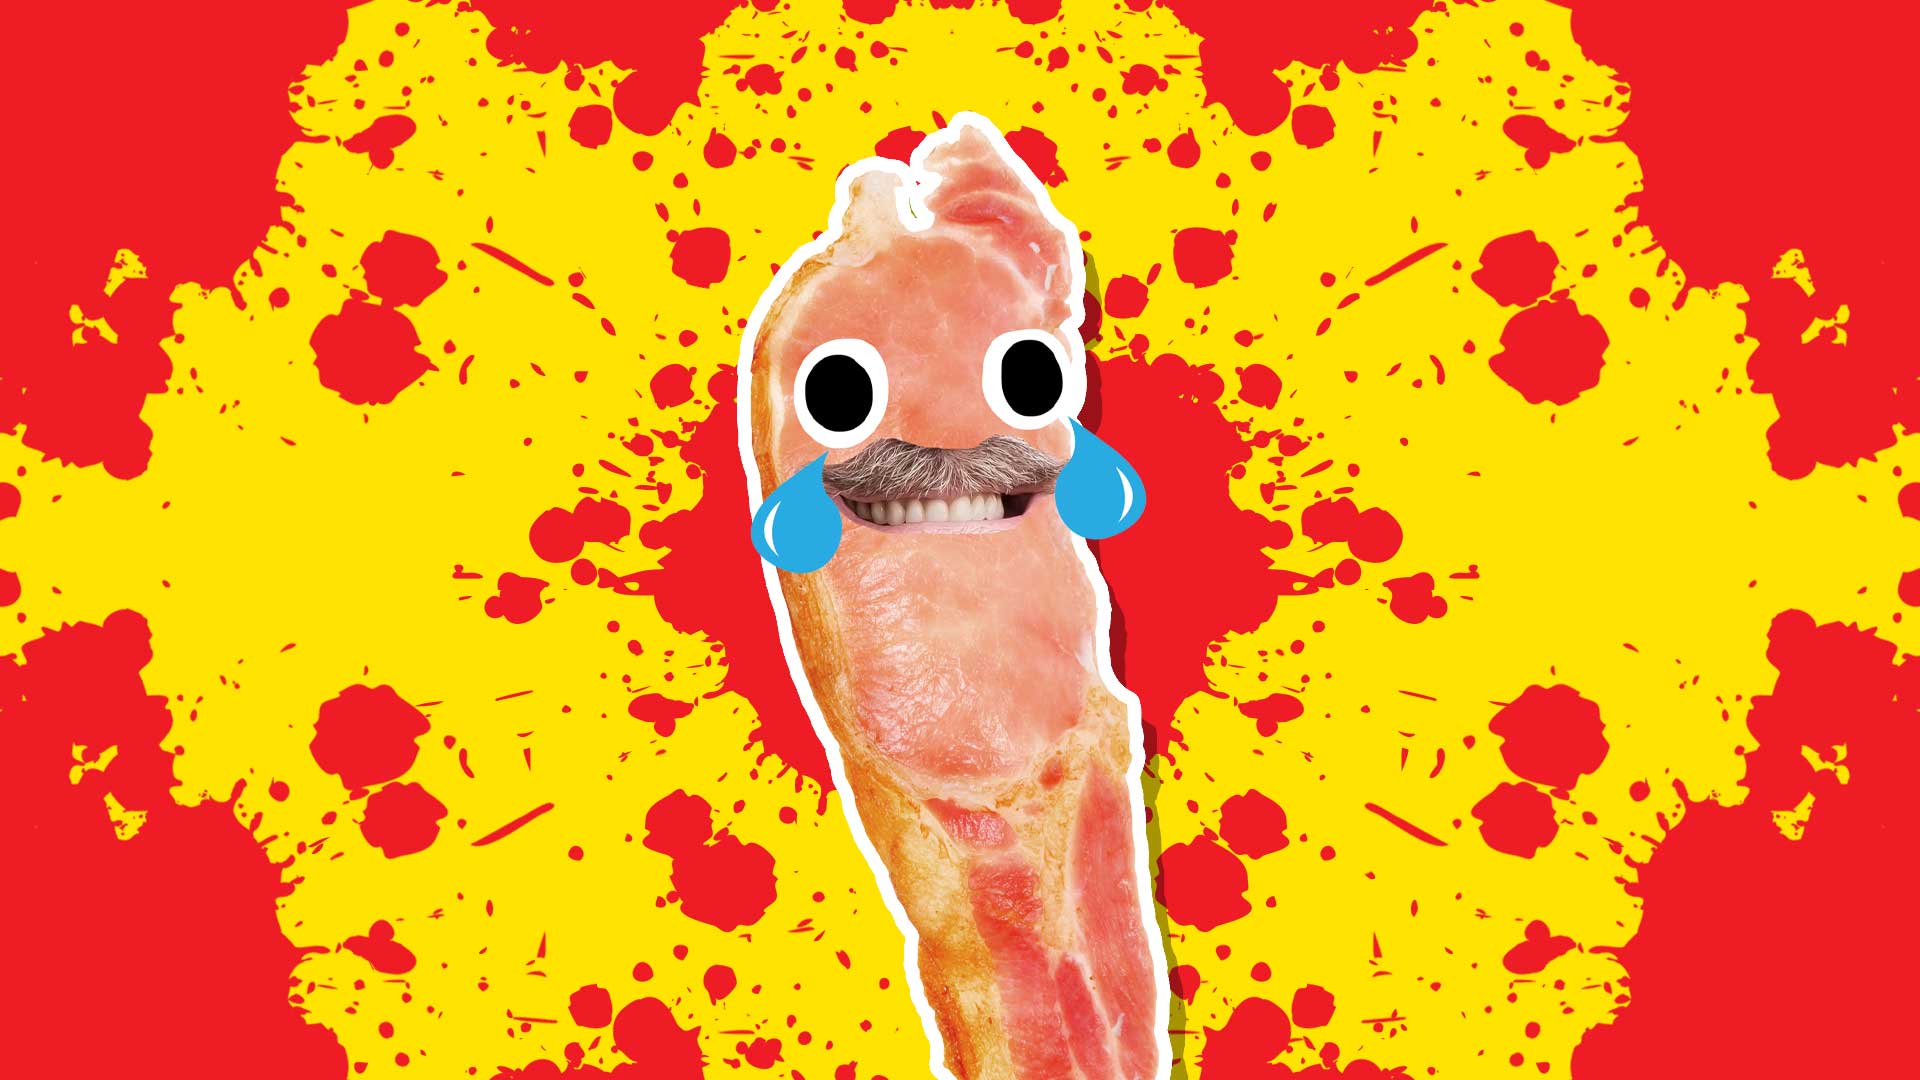 A laughing rasher of bacon